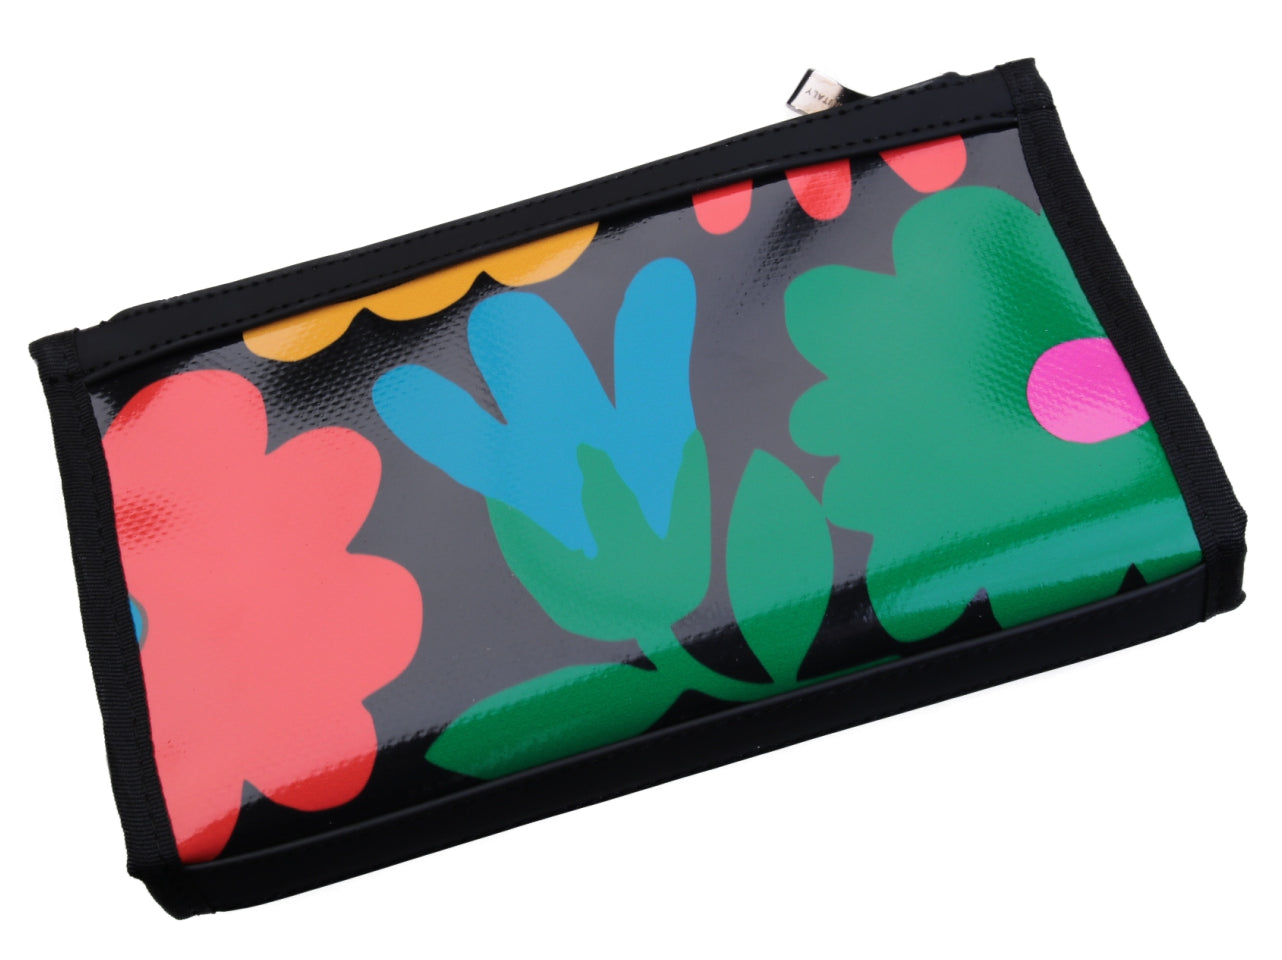 LARGE BLACK WOMEN'S WALLET WITH COLOUFUL FLOWERS. MODEL PIT MADE OF LORRY TARPAULIN. - Limited Edition Paul Meccanico